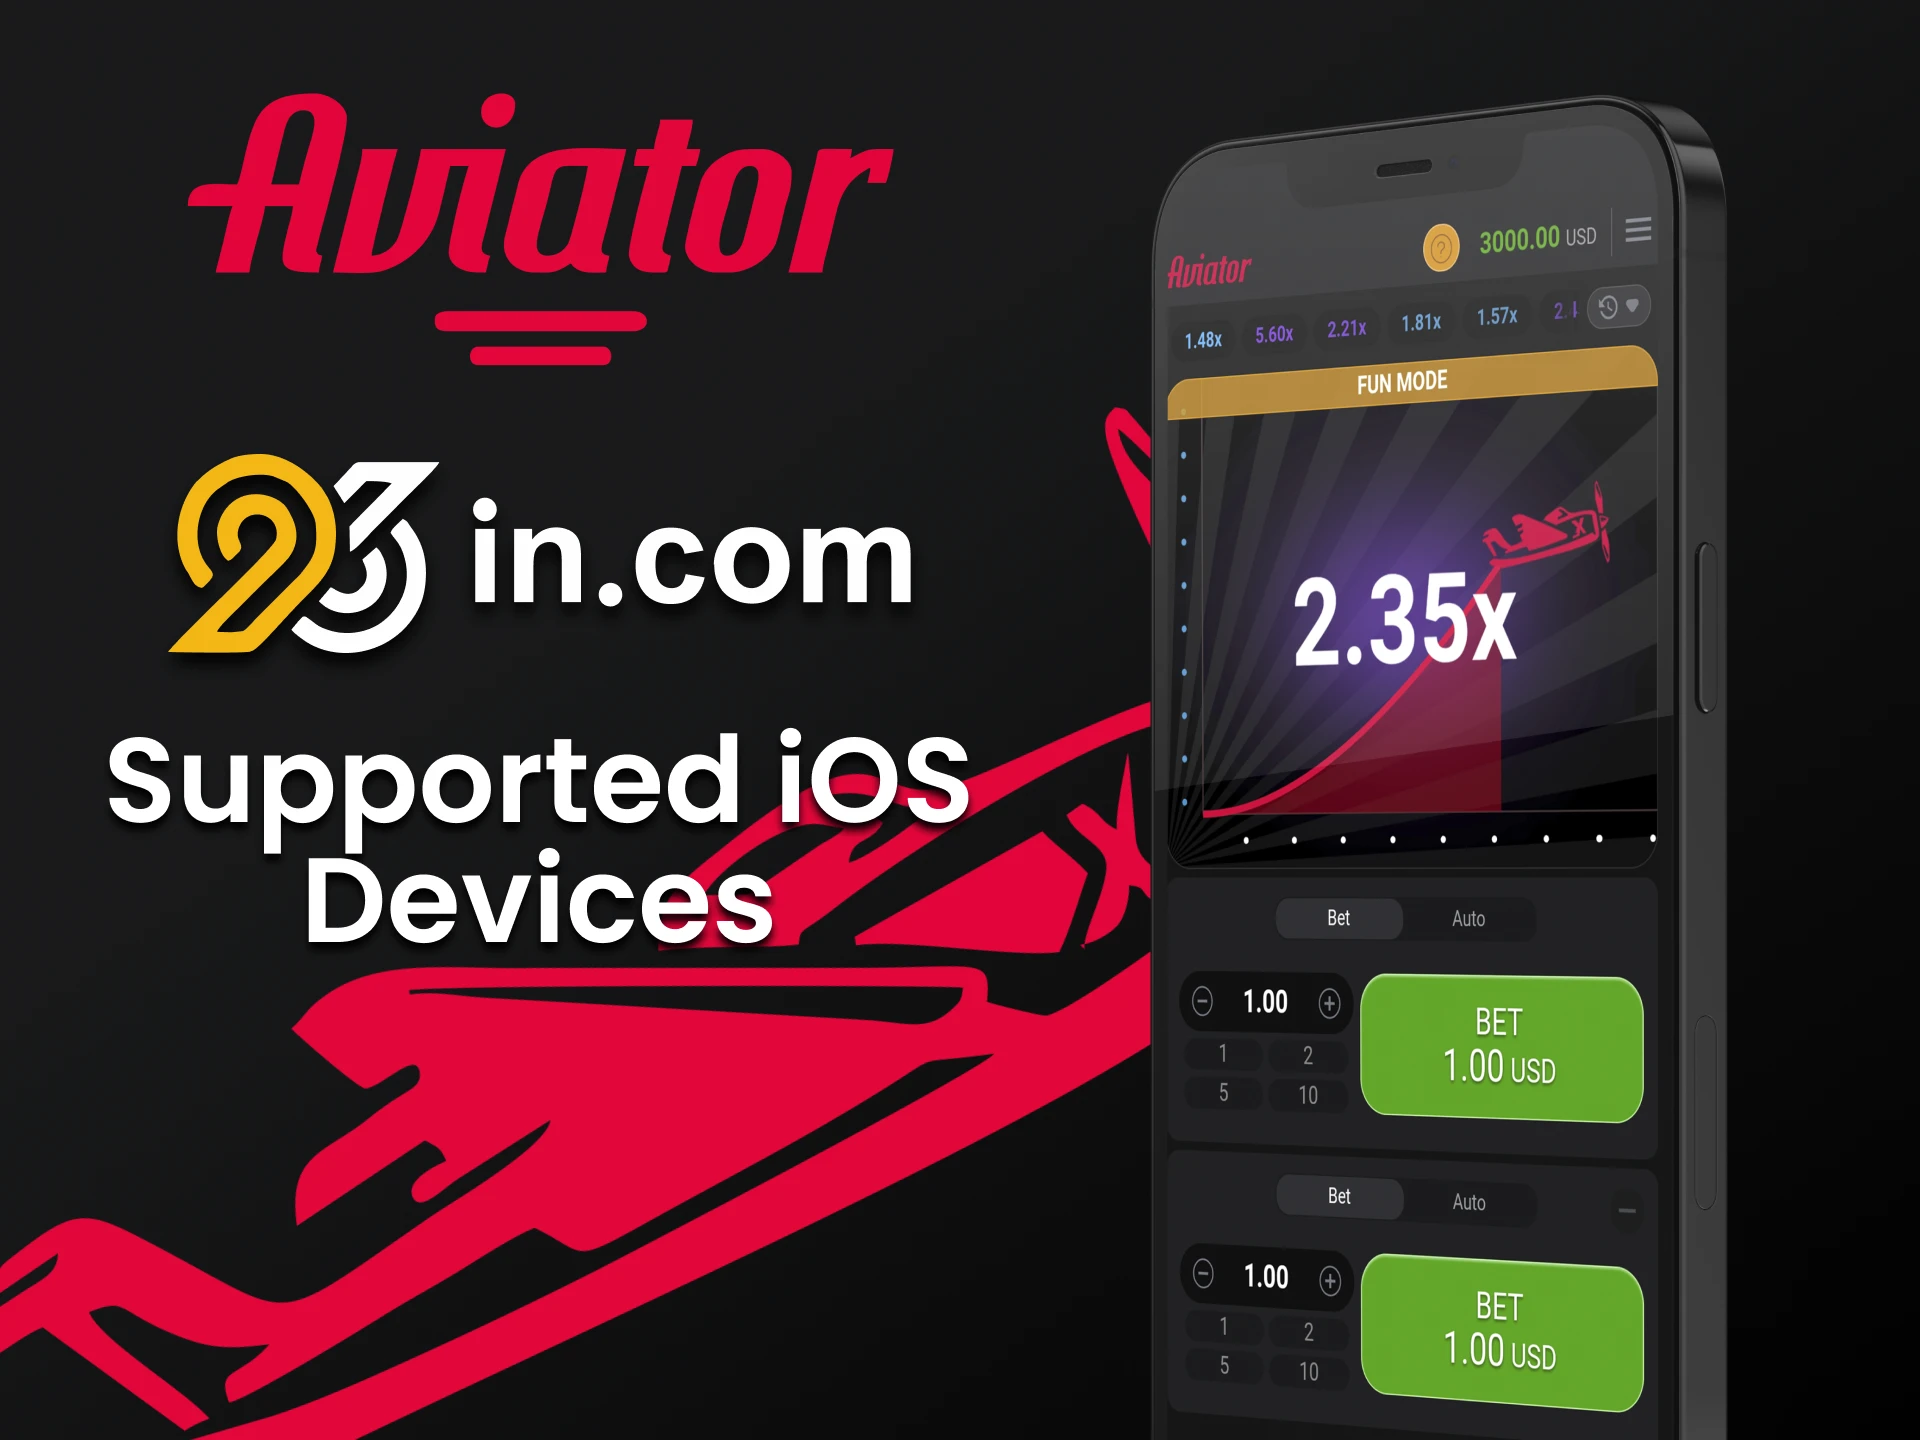 Play Aviator in the 96in app for iOS.